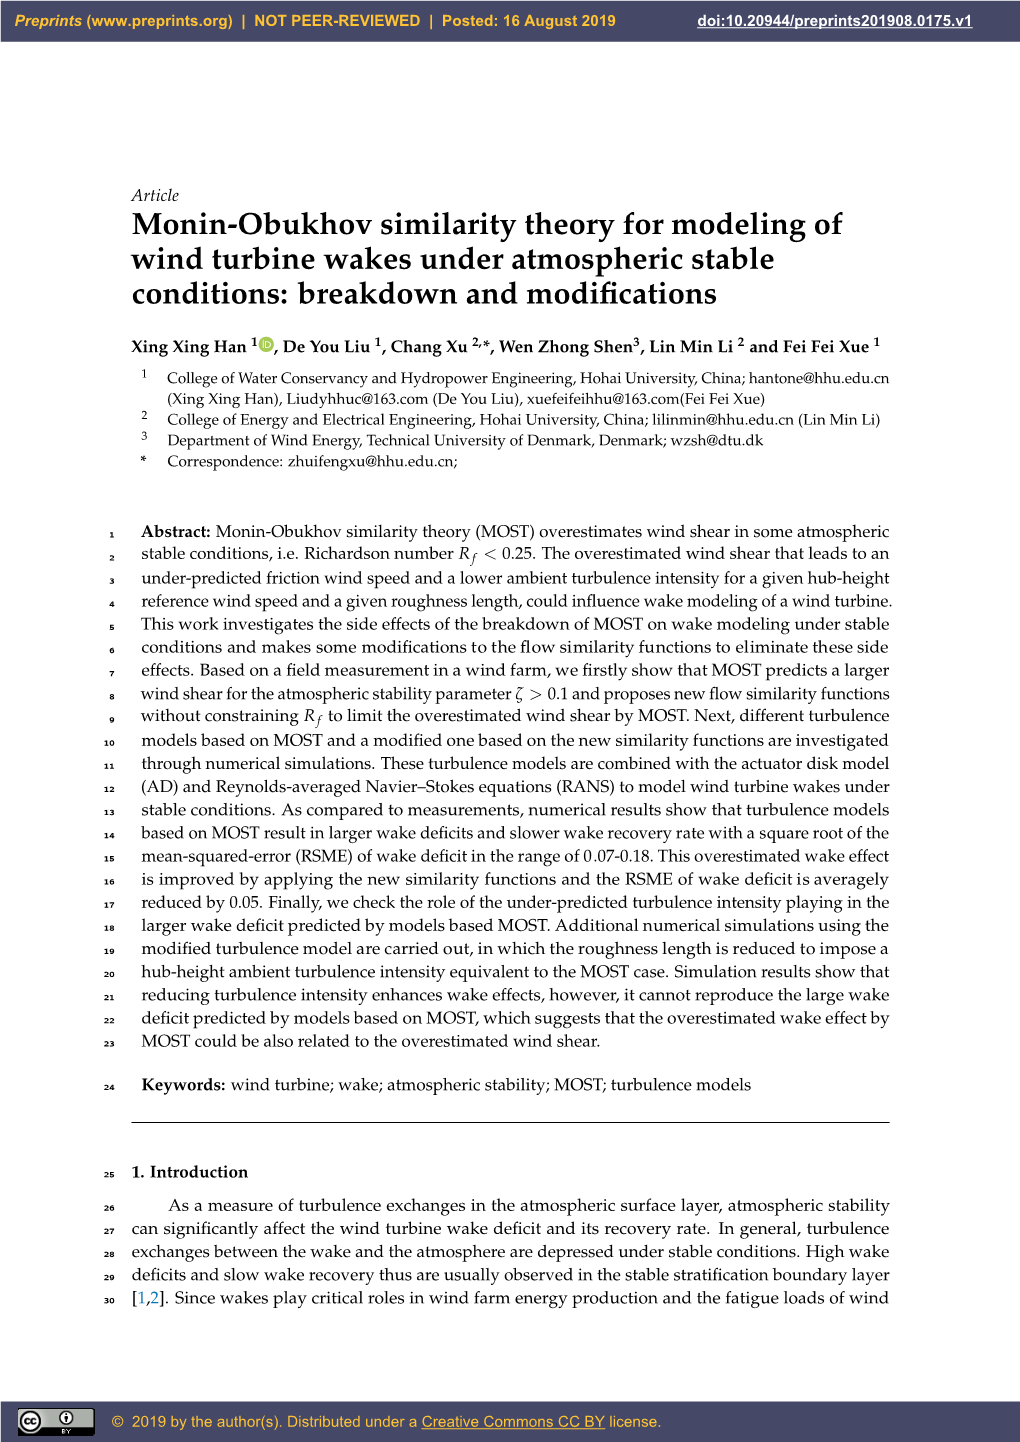 Monin-Obukhov Similarity Theory for Modeling of Wind Turbine Wakes Under Atmospheric Stable Conditions: Breakdown and Modiﬁcations